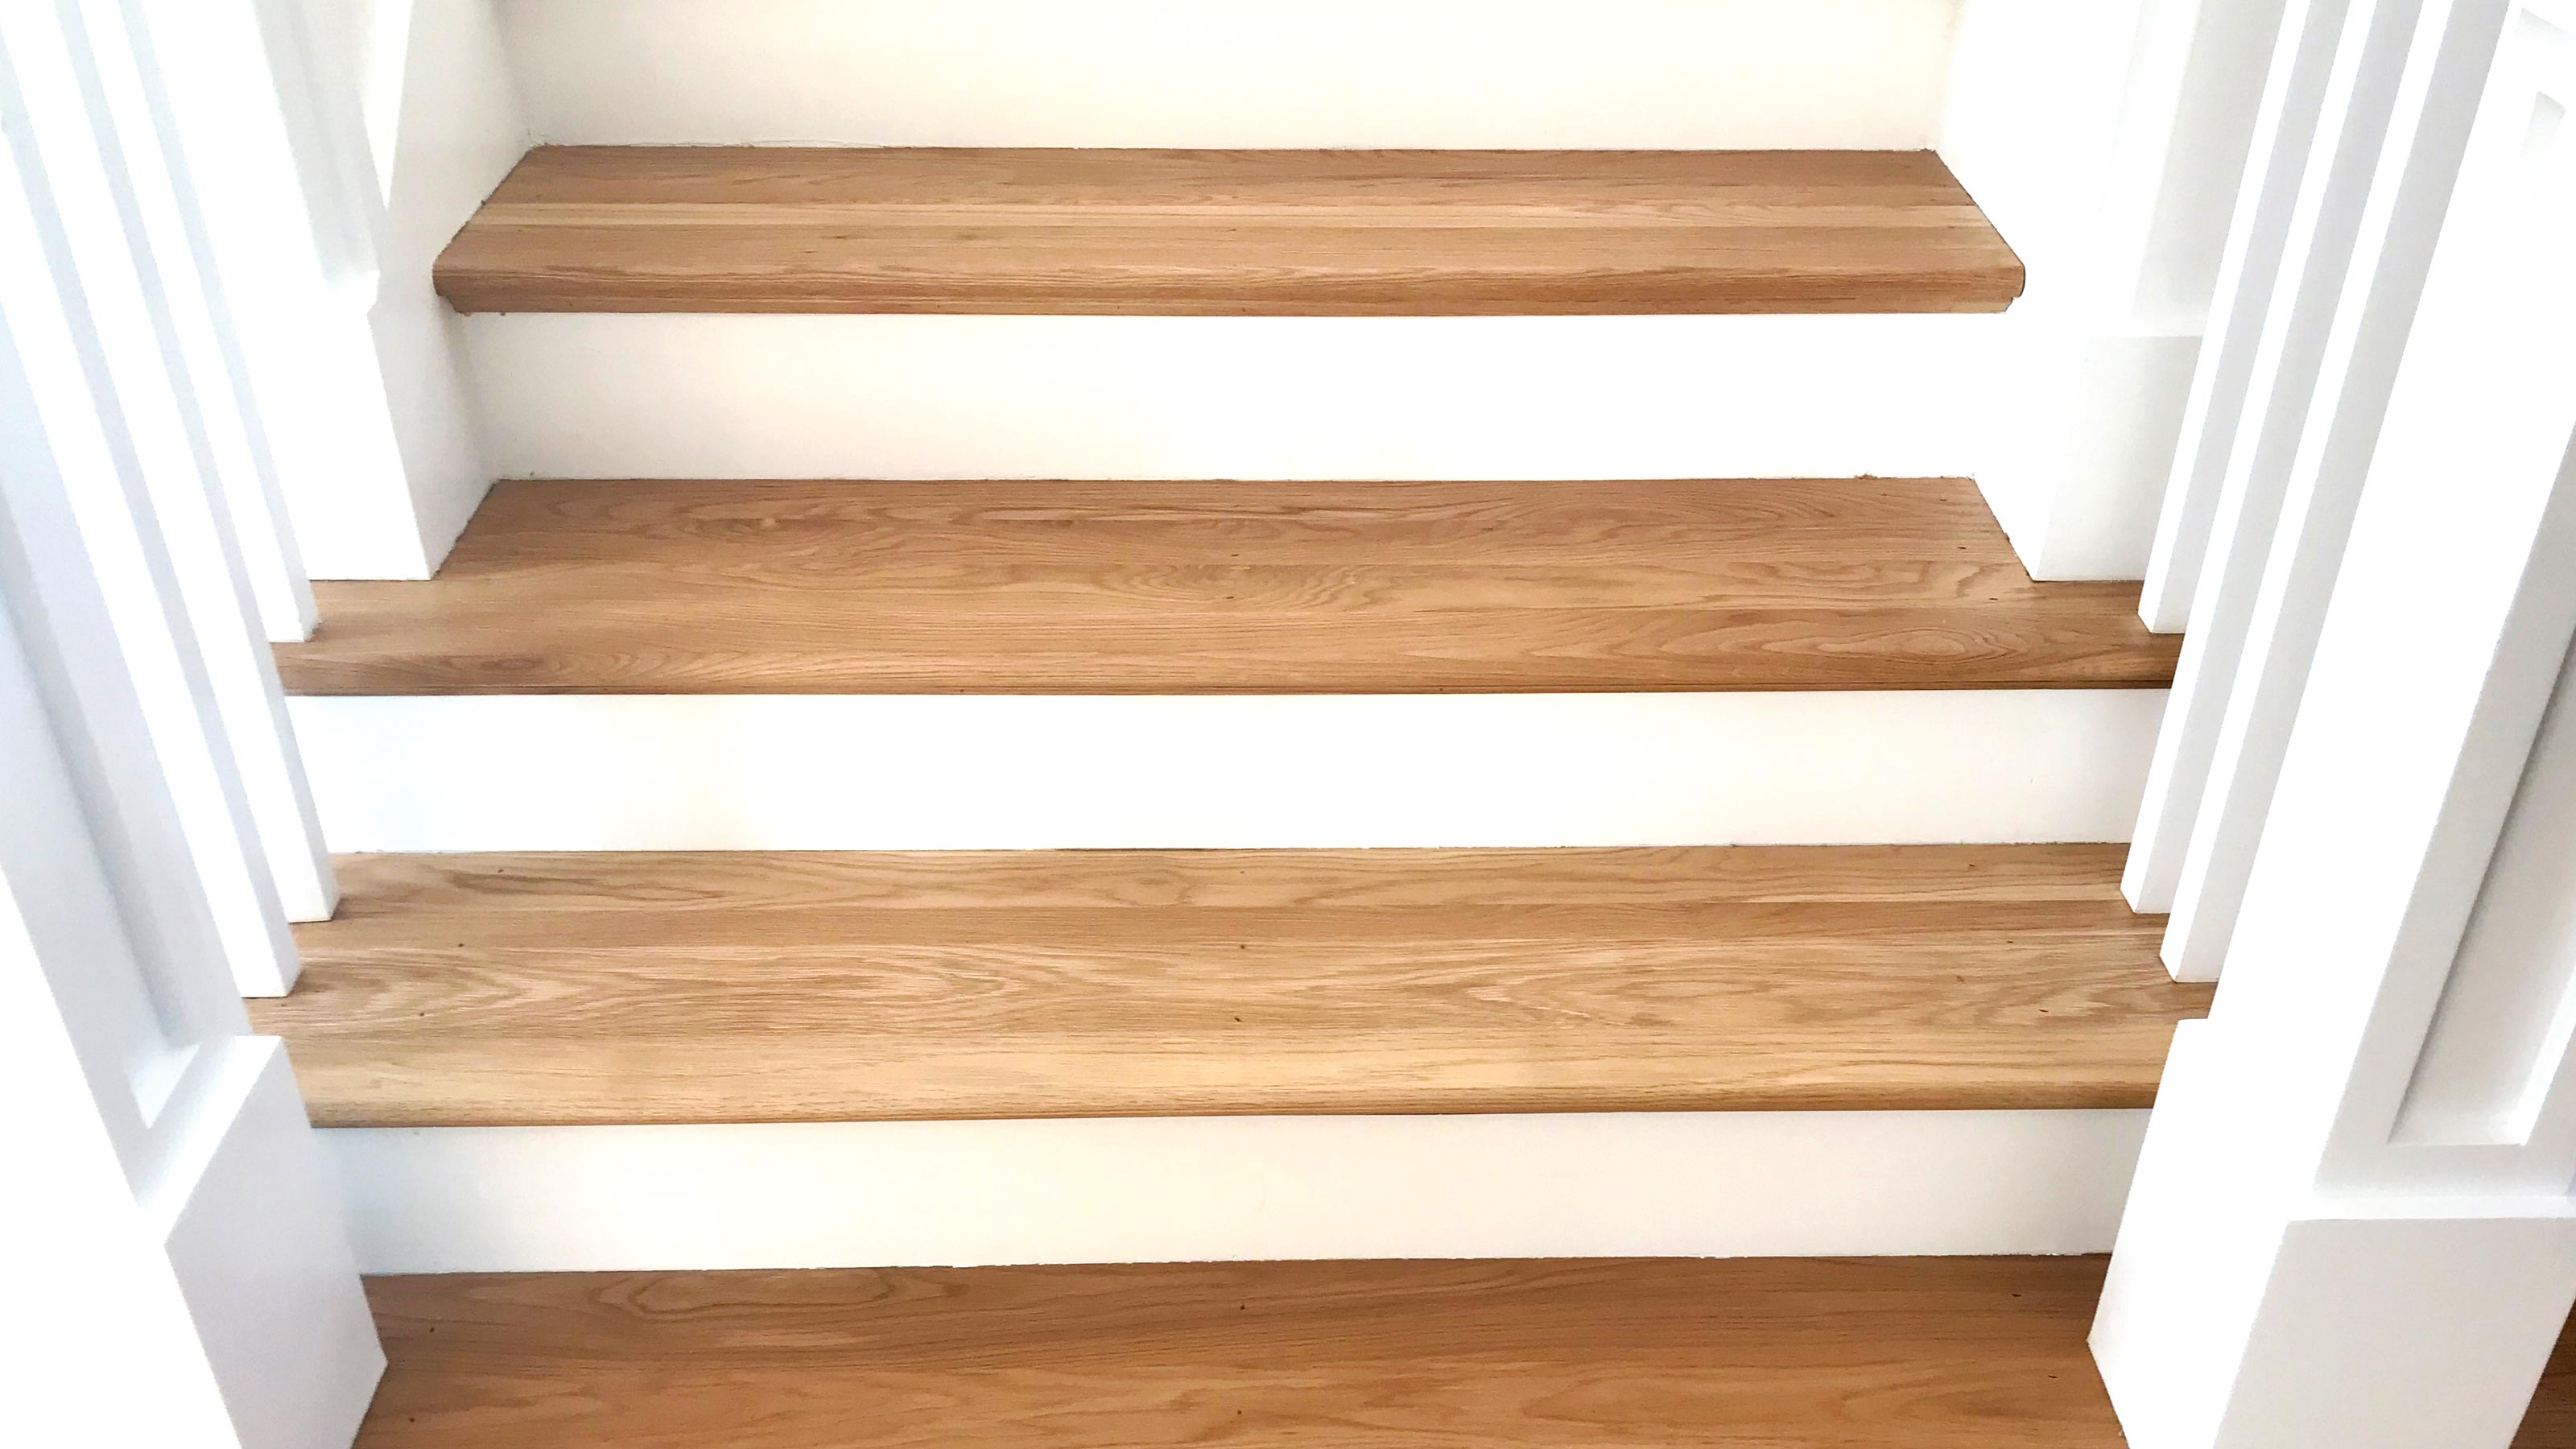 How to Fix Squeaky Stairs - This Old House